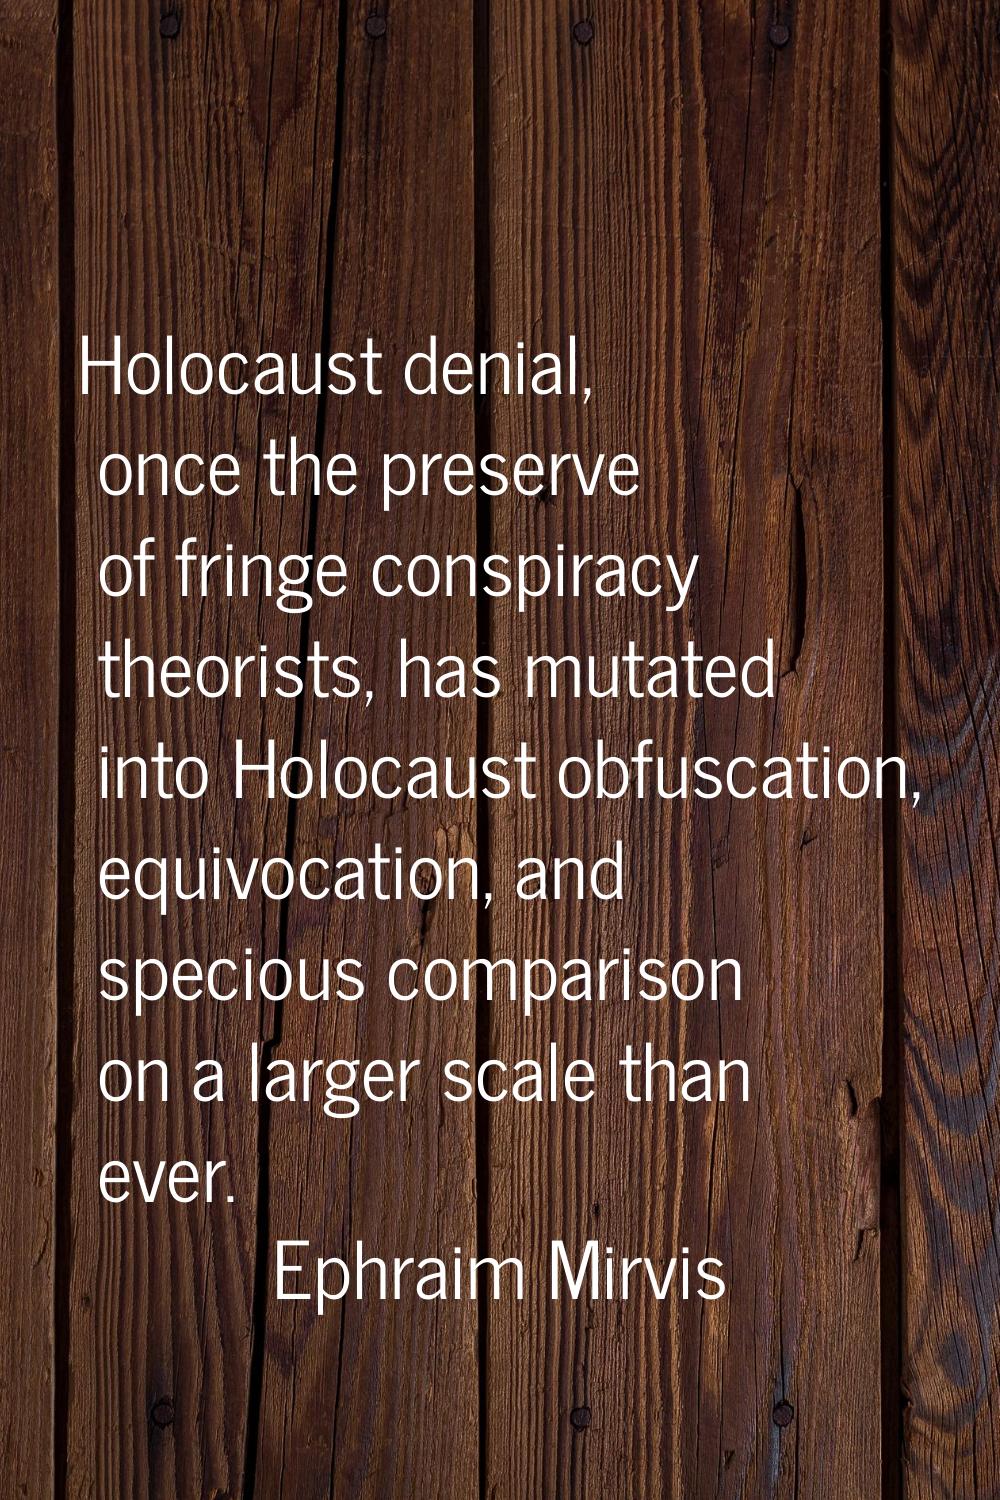 Holocaust denial, once the preserve of fringe conspiracy theorists, has mutated into Holocaust obfu